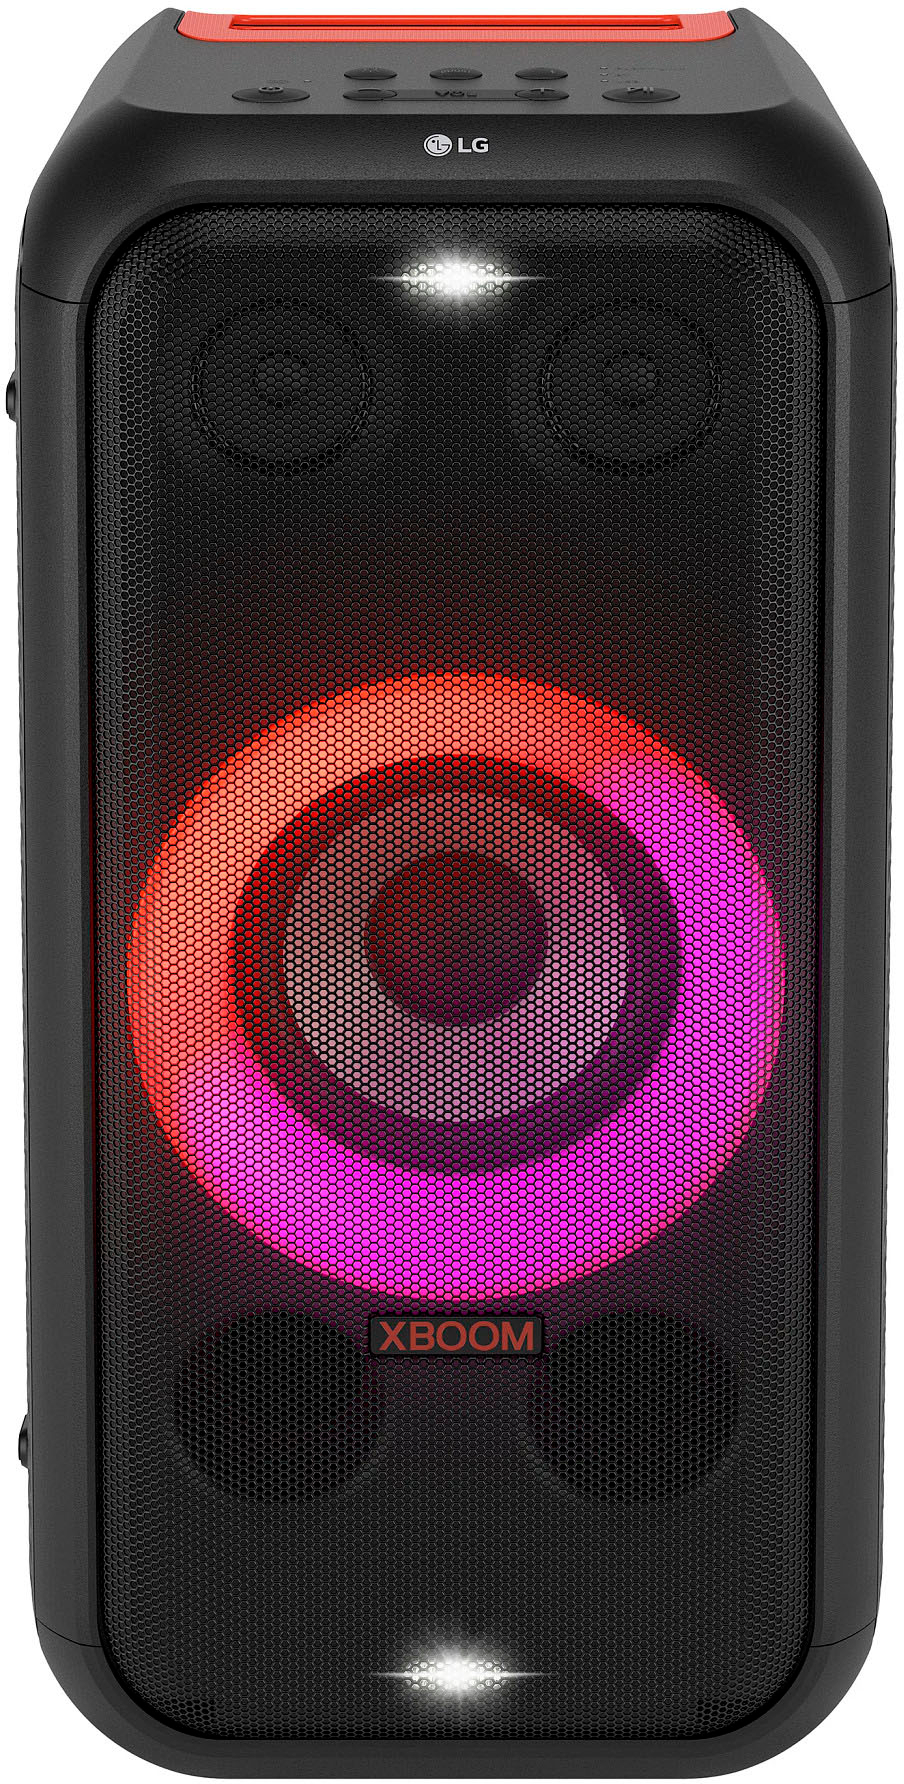 LG XBOOM XL5S Tower Speaker Party - Buy Portable LED Black with XL5 Best Lighting